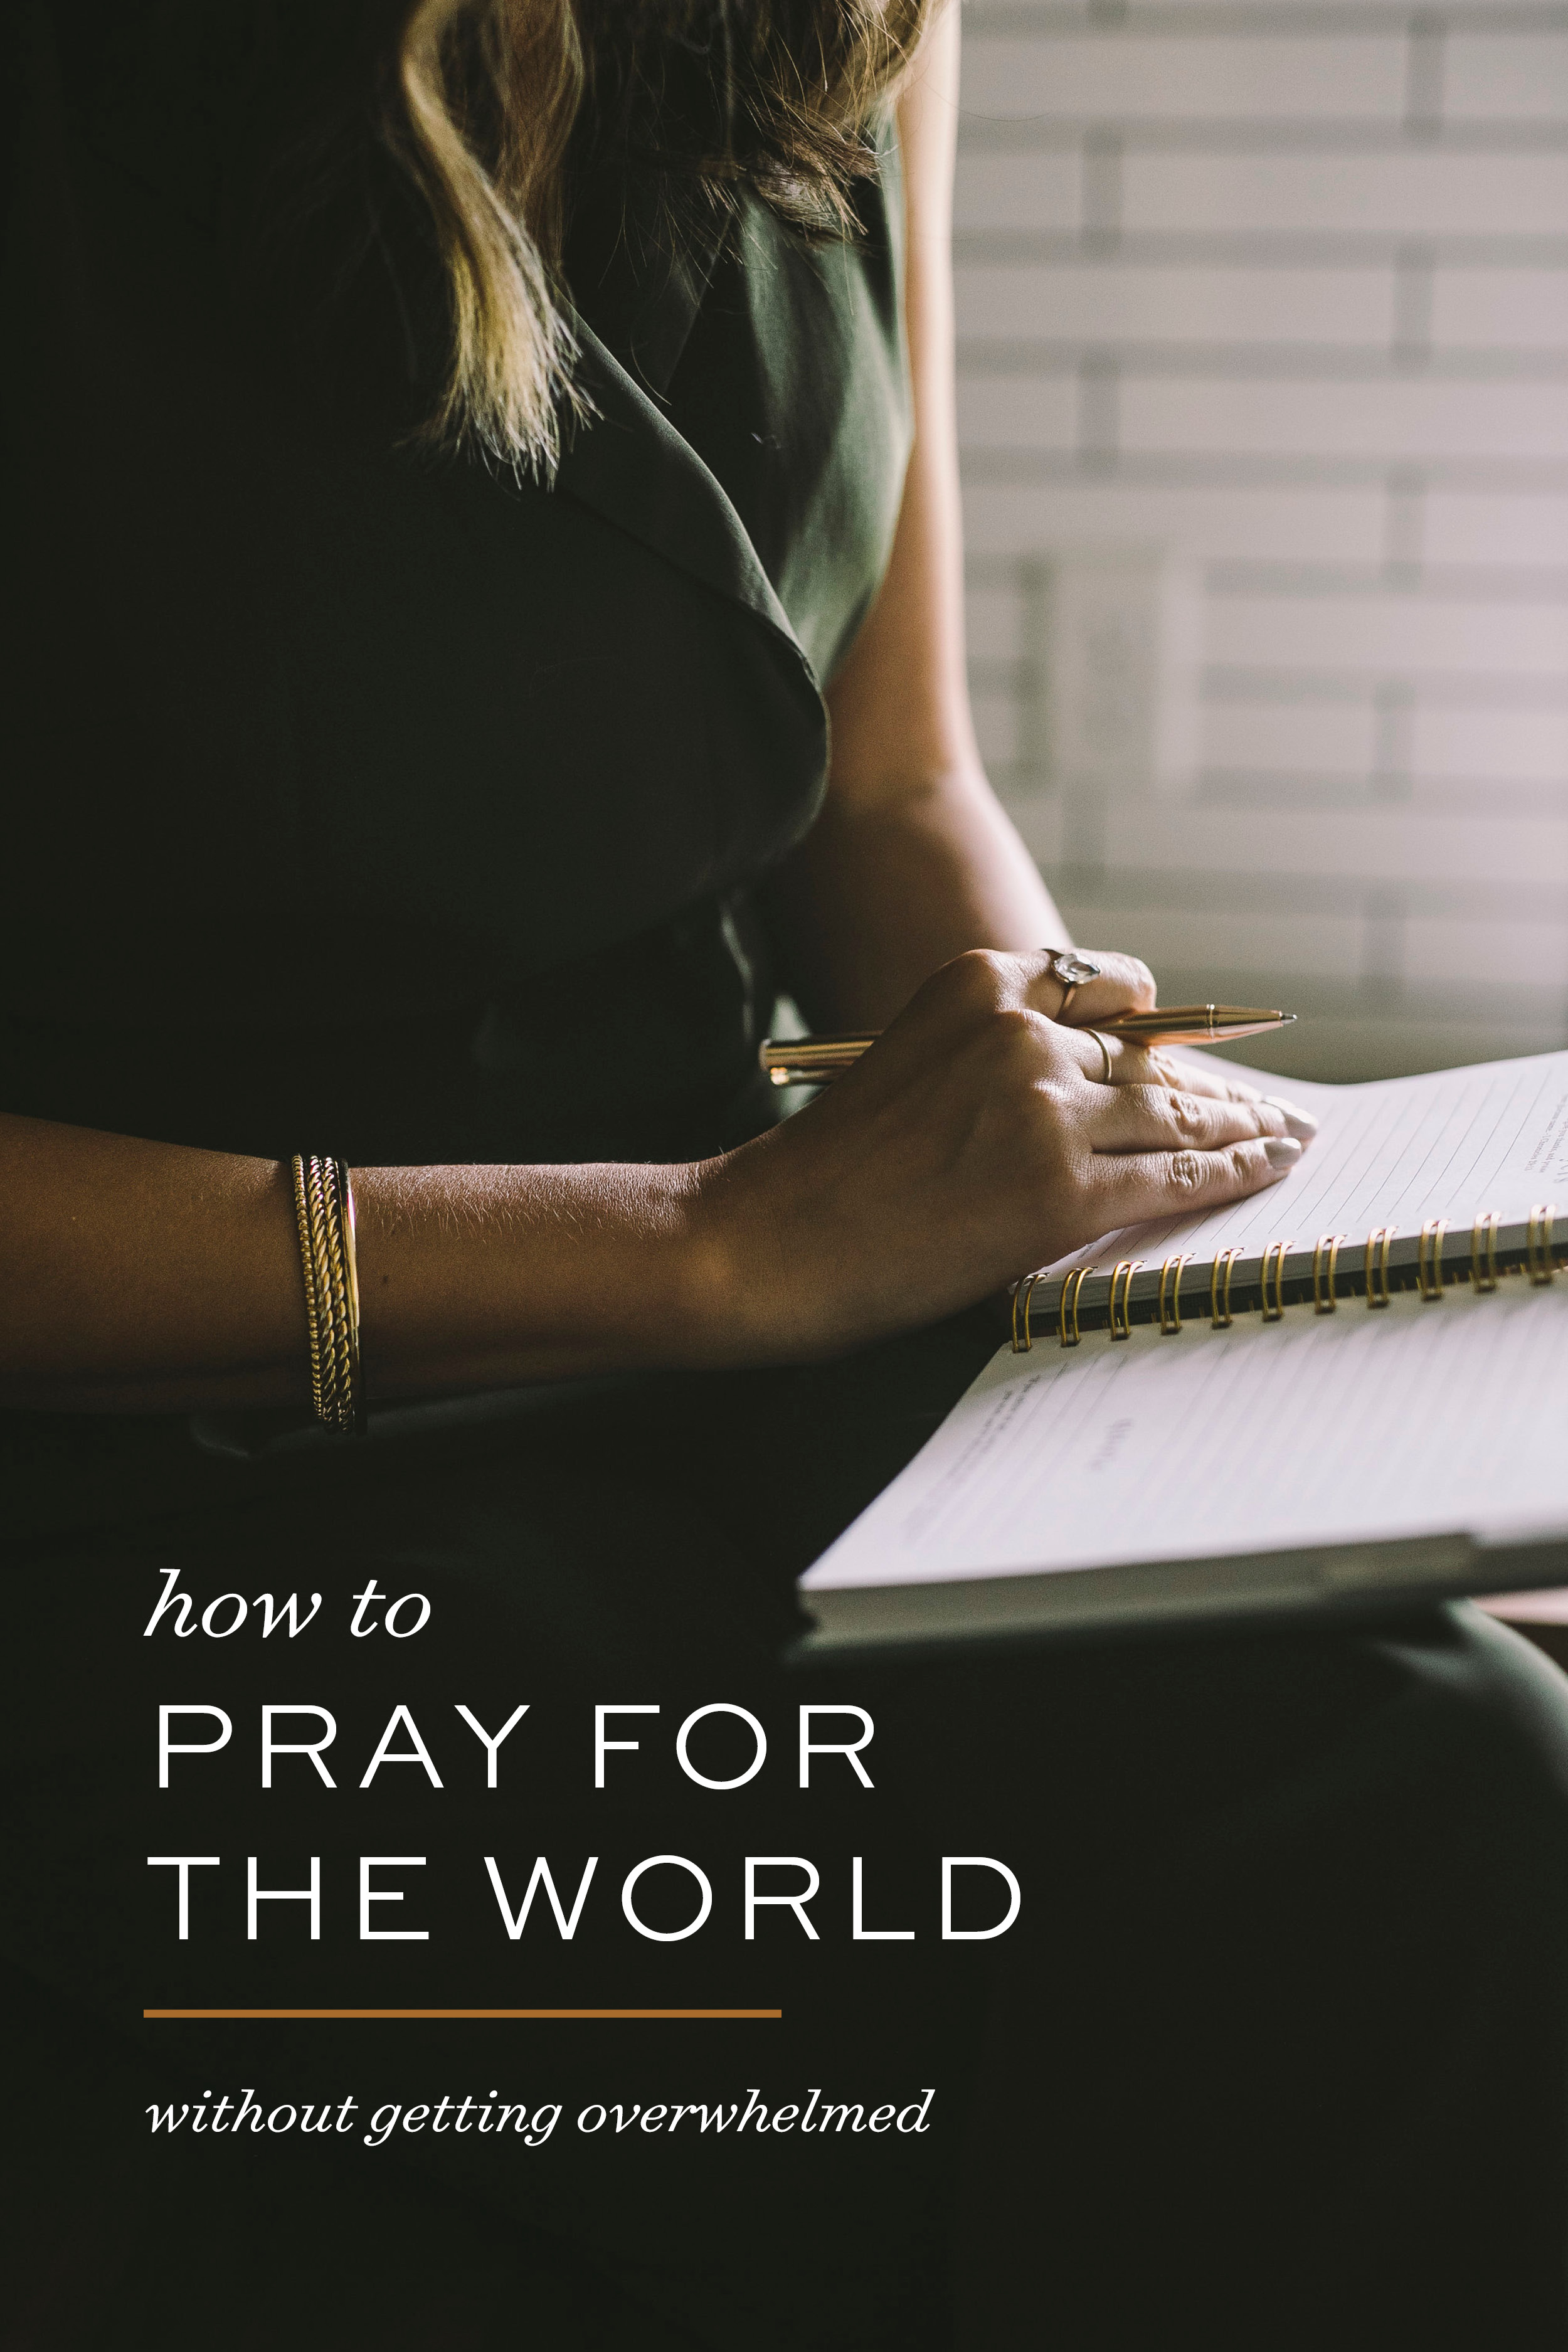 How to Pray for your World & Nation by Valerie Woerner | Val Marie Paper, prayer journal, prayer tips, Bible study, women's ministry, faith, Christian books, news, family